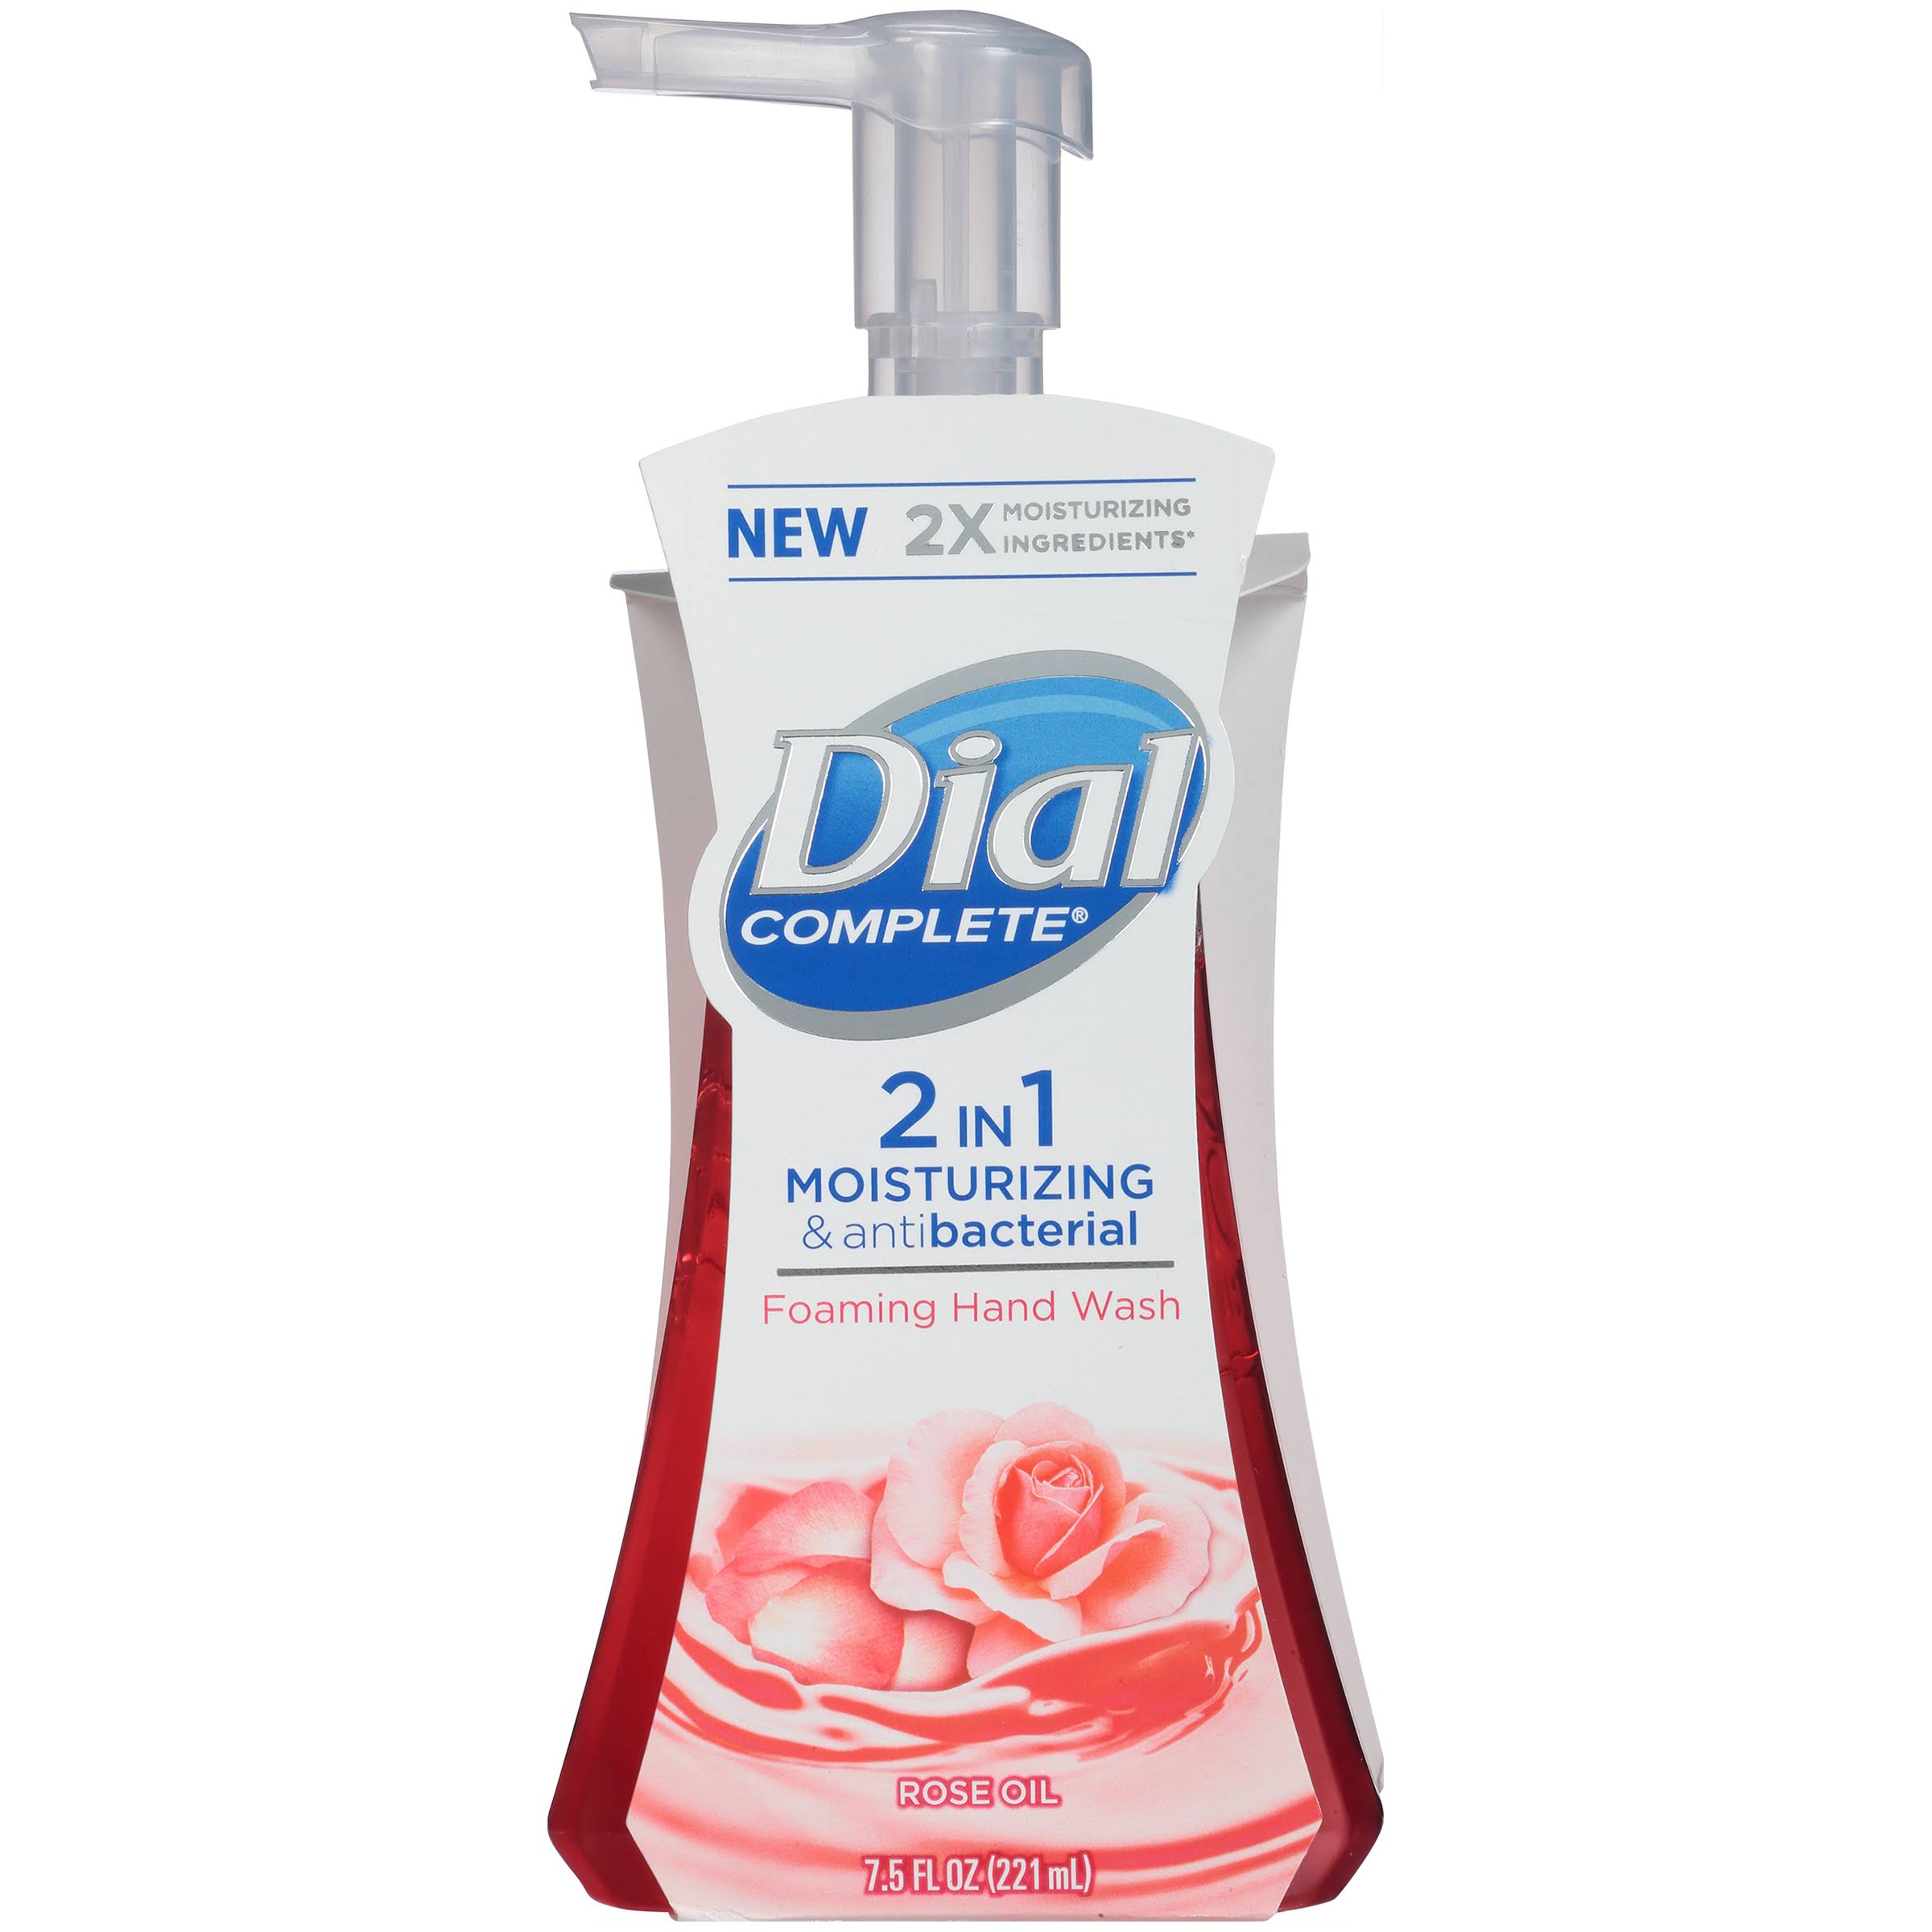 Dial Complete 2 in 1 Moisturizing and Antibacterial Foaming Hand Wash - Rose Oil, 7.5oz